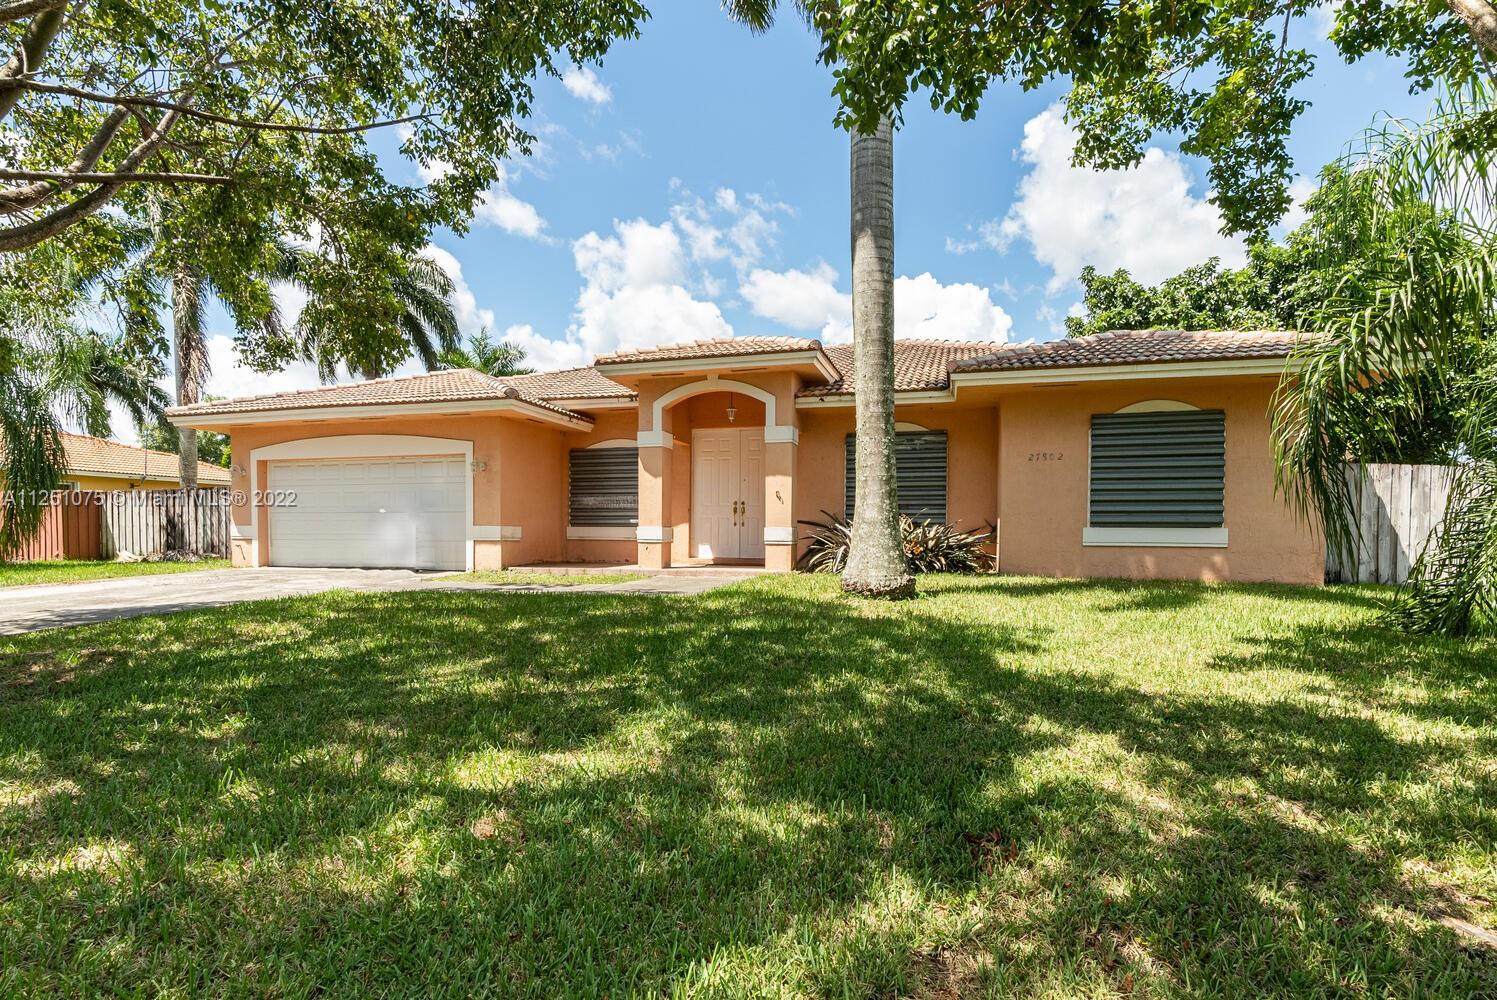 Beautiful home in a great neighborhood! This home has it all, featuring high ceilings, all tile floors, and a spacious layout!  Corner lot on a builder's half acre! Fully fenced yard with room for a pool and boat! No association here! Will not last, make your appointment today!